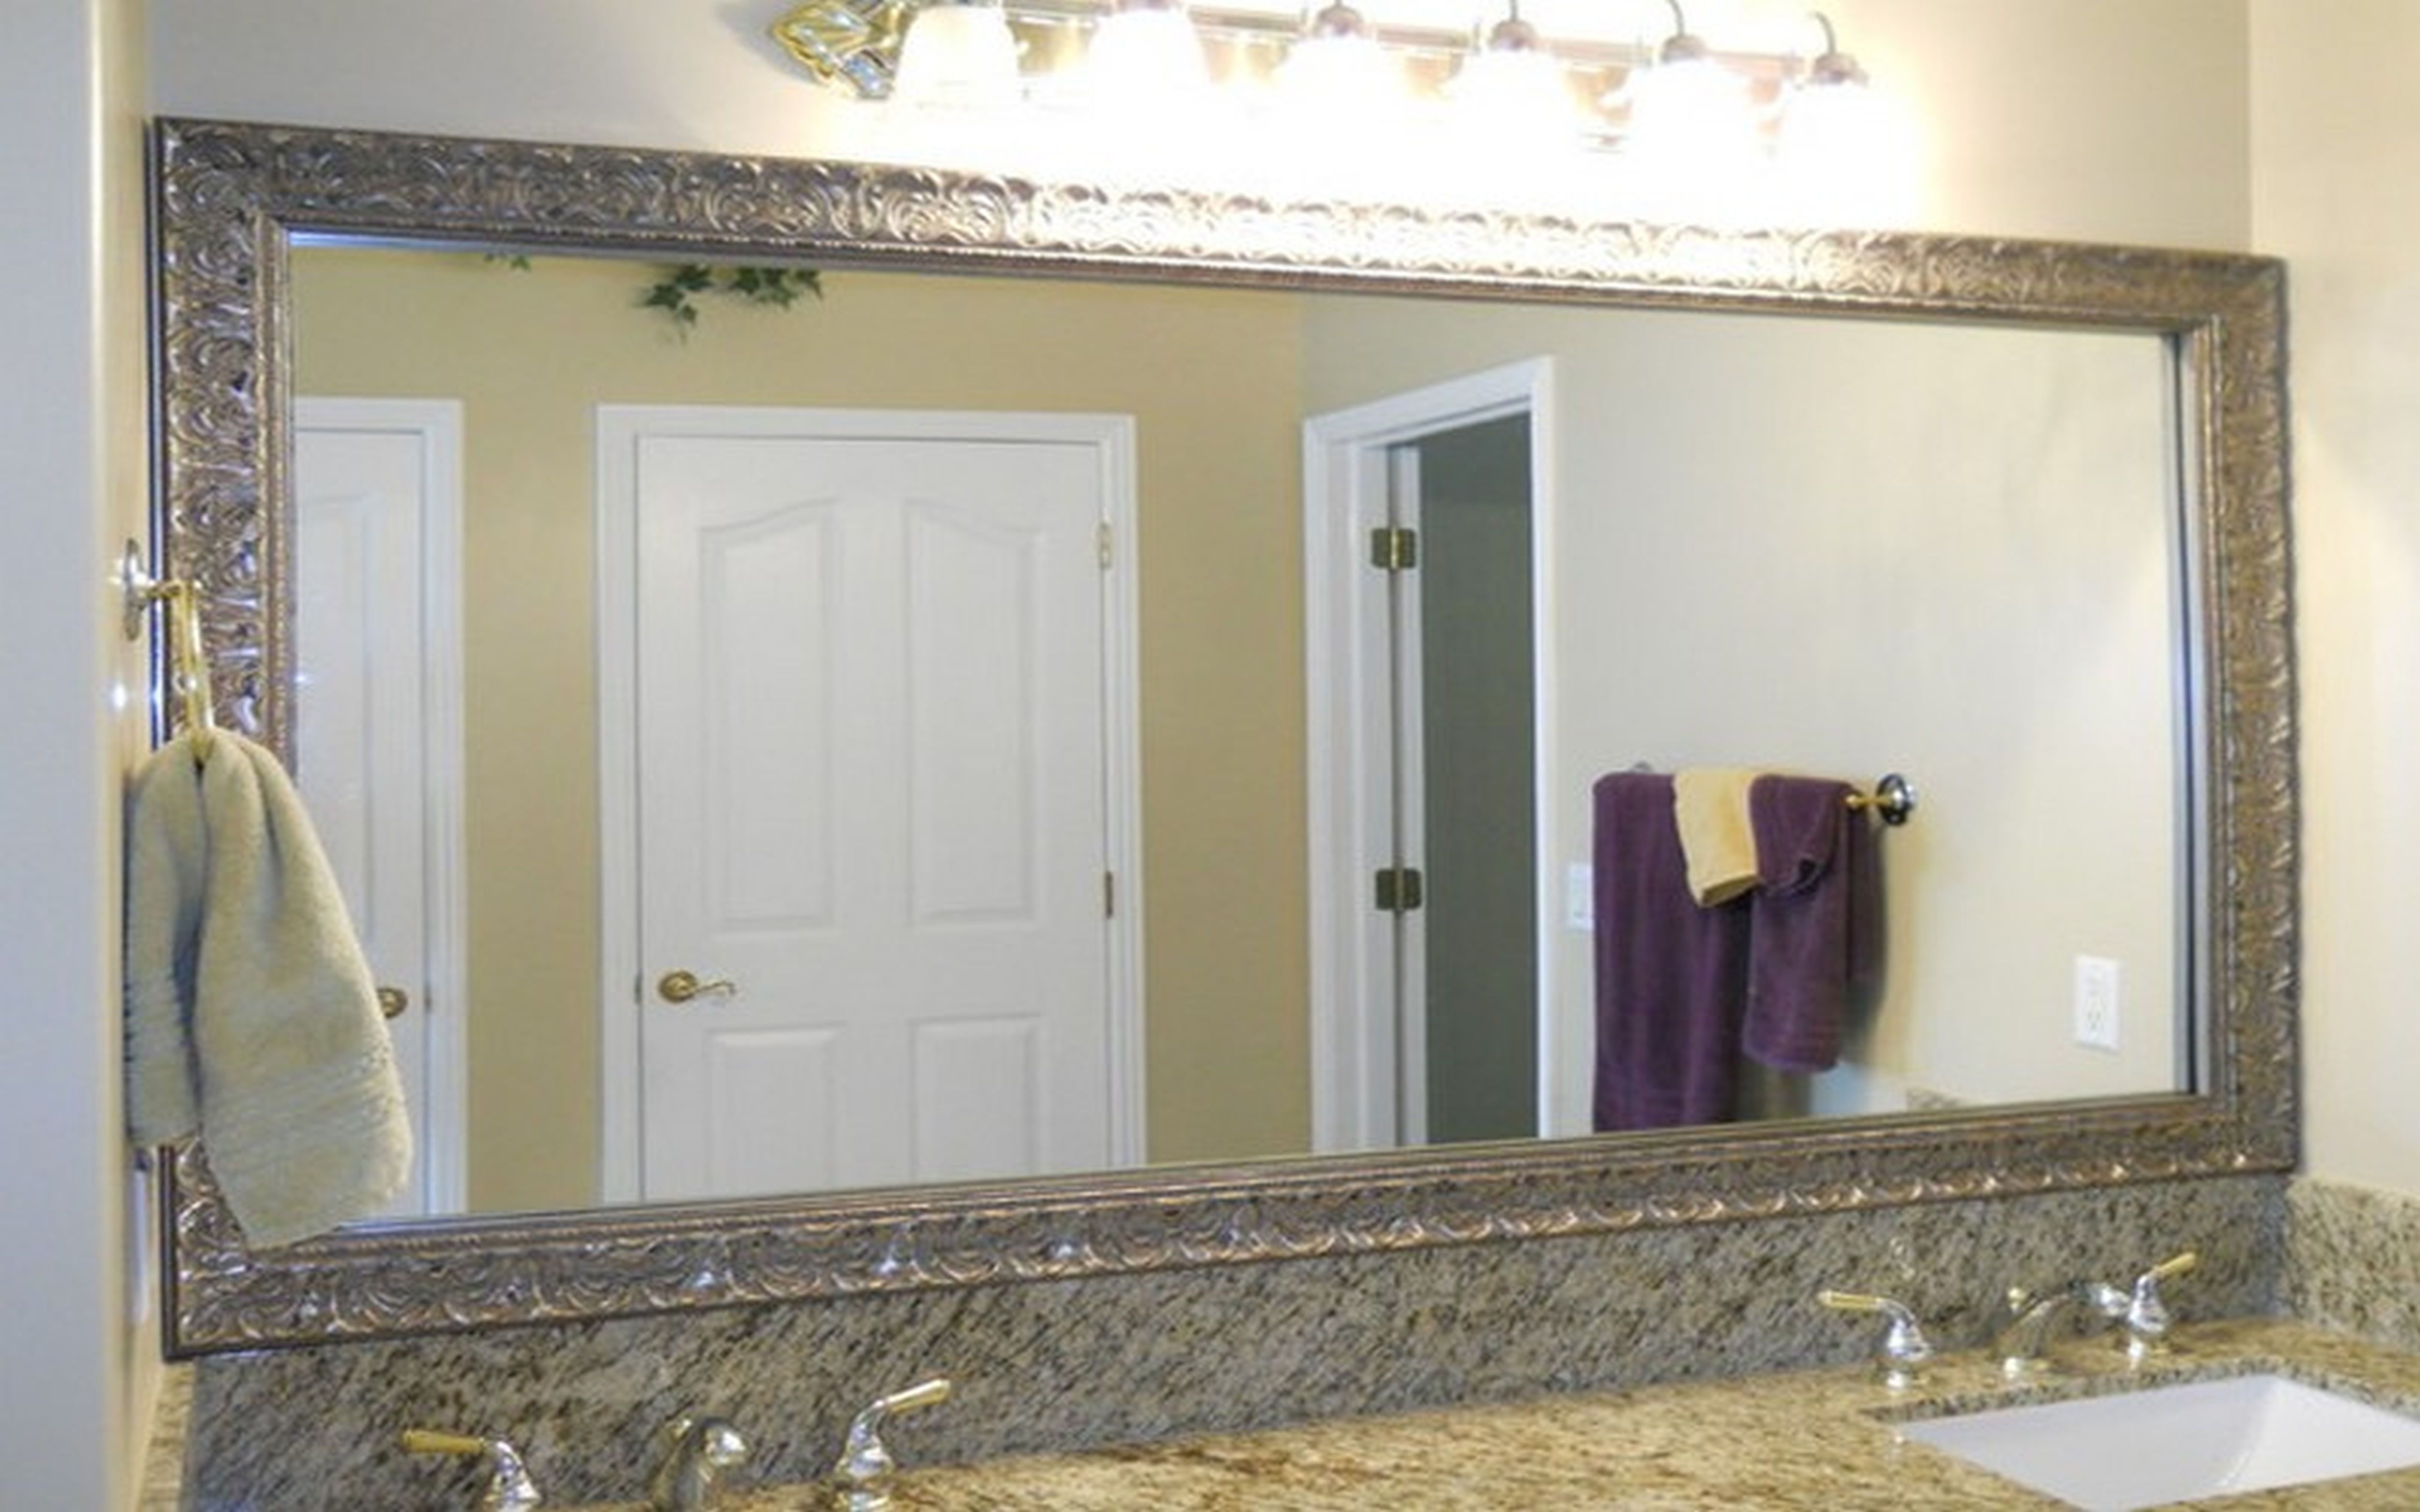 Large Landscape Bathroom Mirrors Home Pertaining To Large Landscape Mirrors (View 4 of 15)